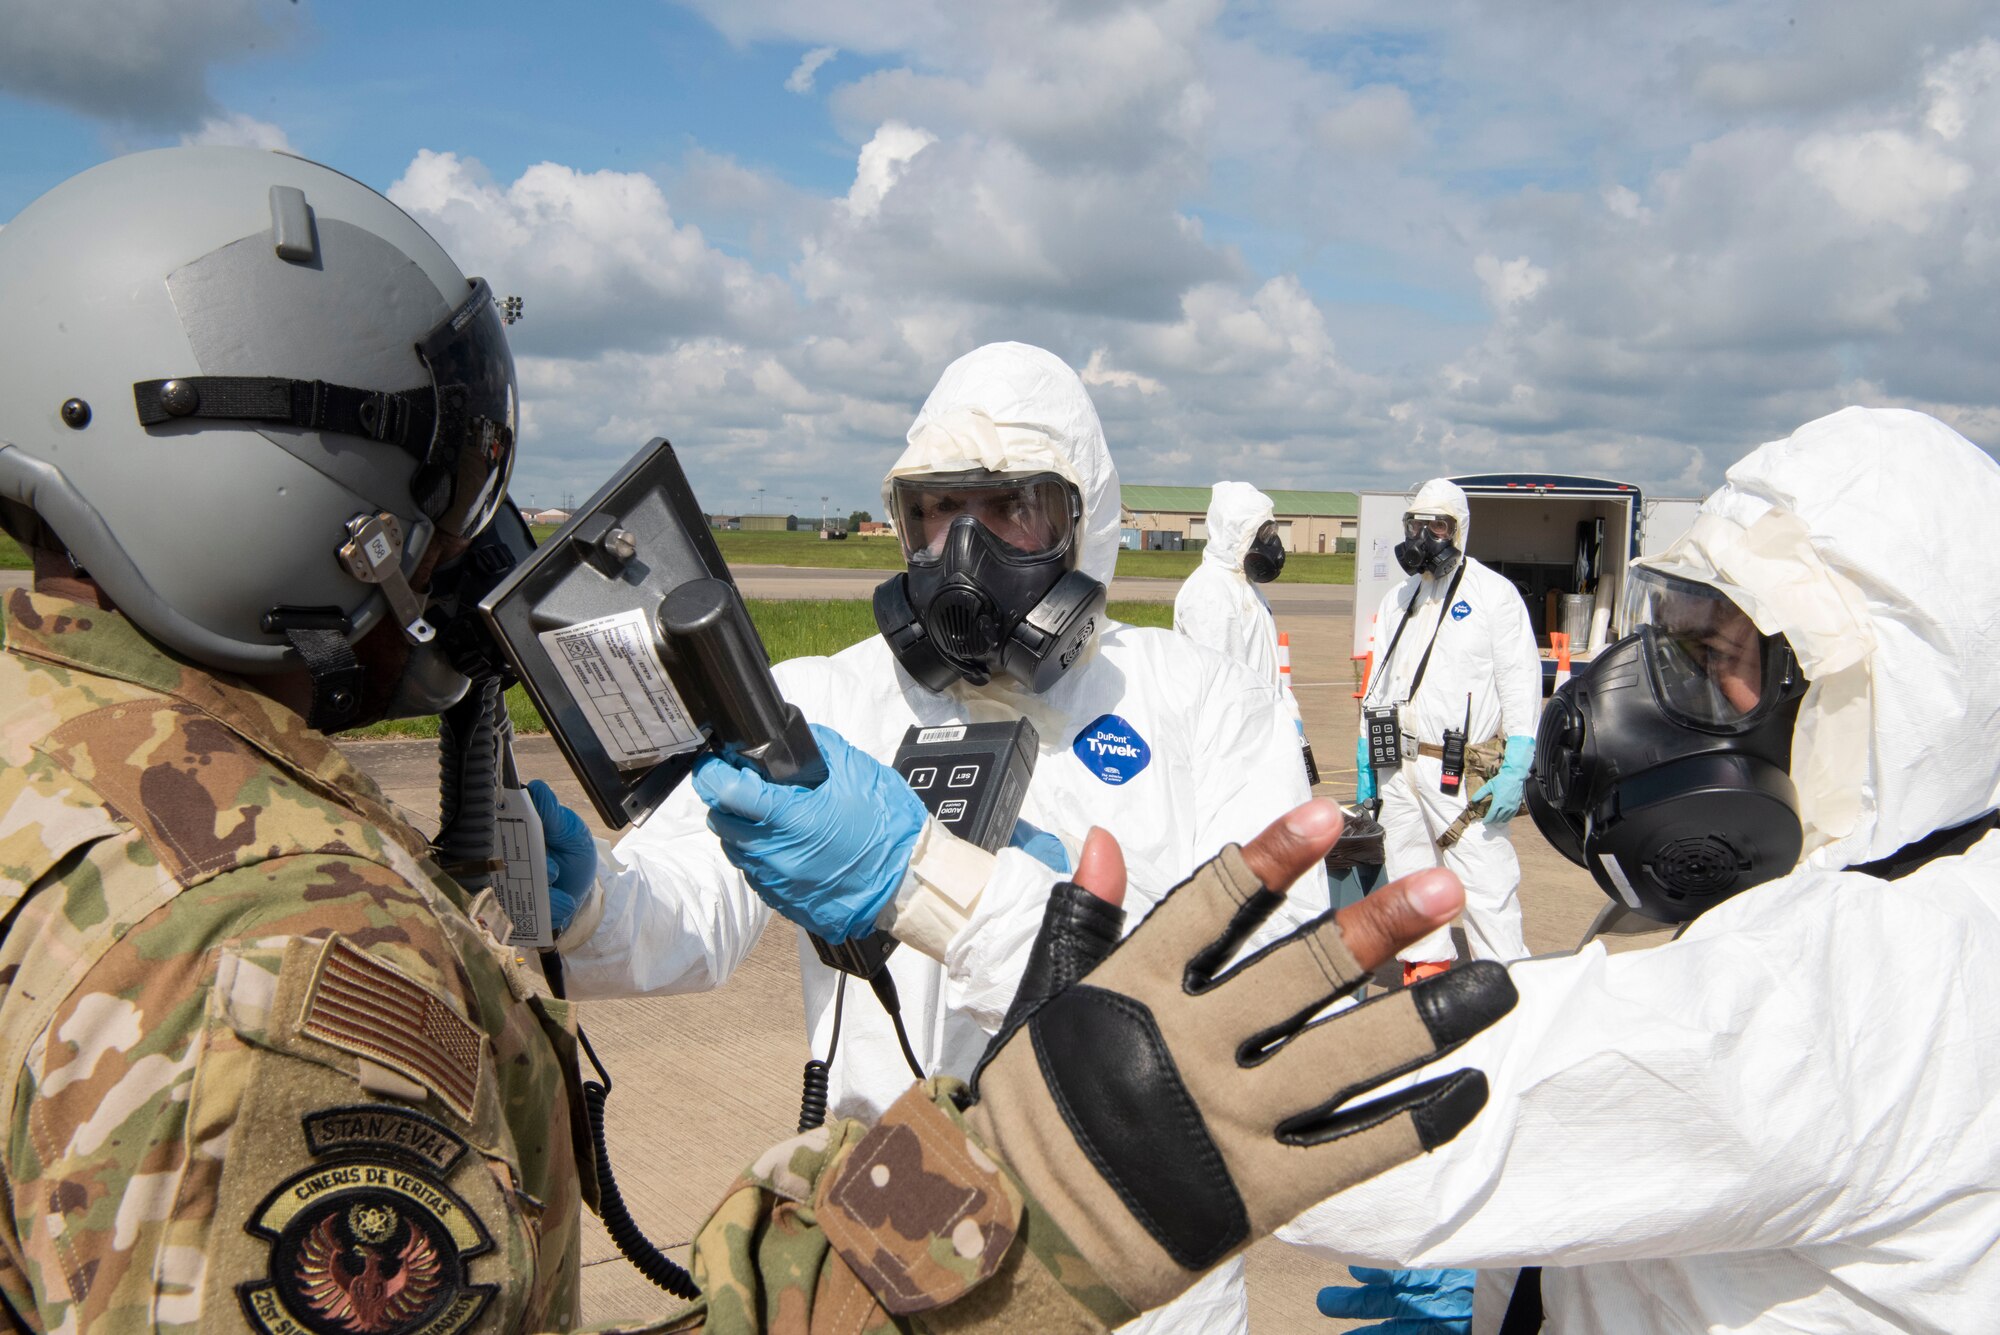 U.S. Air Force Airman 1st Class Ethan Harlan and Airman 1st Class Miranda Dickinson, 100th Civil Engineer Squadron emergency management journeymen scans Staff Sgt. Victor Williams, 21st Surveillance Squadron Detachment 1 special equipment operator for contamination during an Aircraft Radiological Recovery Plan training event at Royal Air Force Mildenhall, England, May 11, 2023. The WC-135 Constant Phoenix aircraft is currently the only aircraft in the Air Force inventory that conducts air sampling operations. The ability to evaluate radionuclides in the atmosphere enhances the Air Force Technical Applications Center’s ability to monitor Limited Test Ban Treaty of 1963 compliance. (U.S. Air Force photo by Tech. Sgt. Anthony Hetlage)